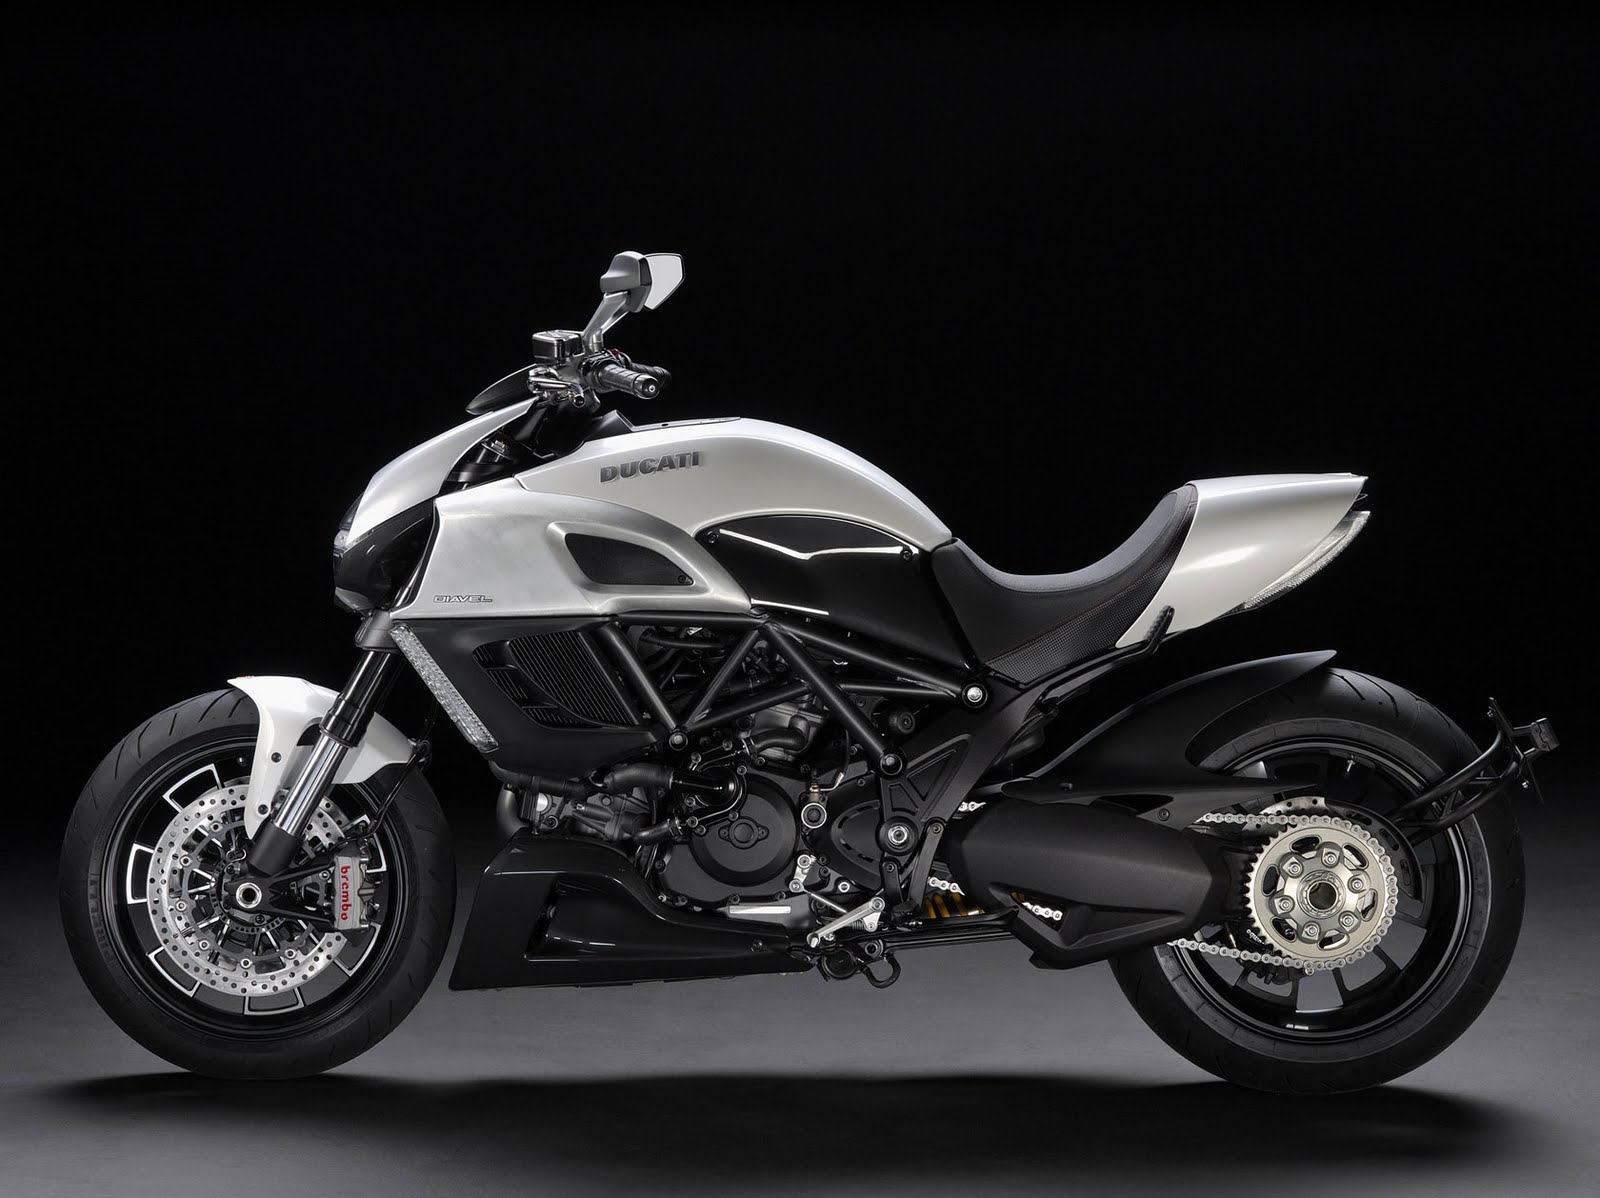 le diavel by sonny - Page 10 2011+Ducati+Diavel+Photos